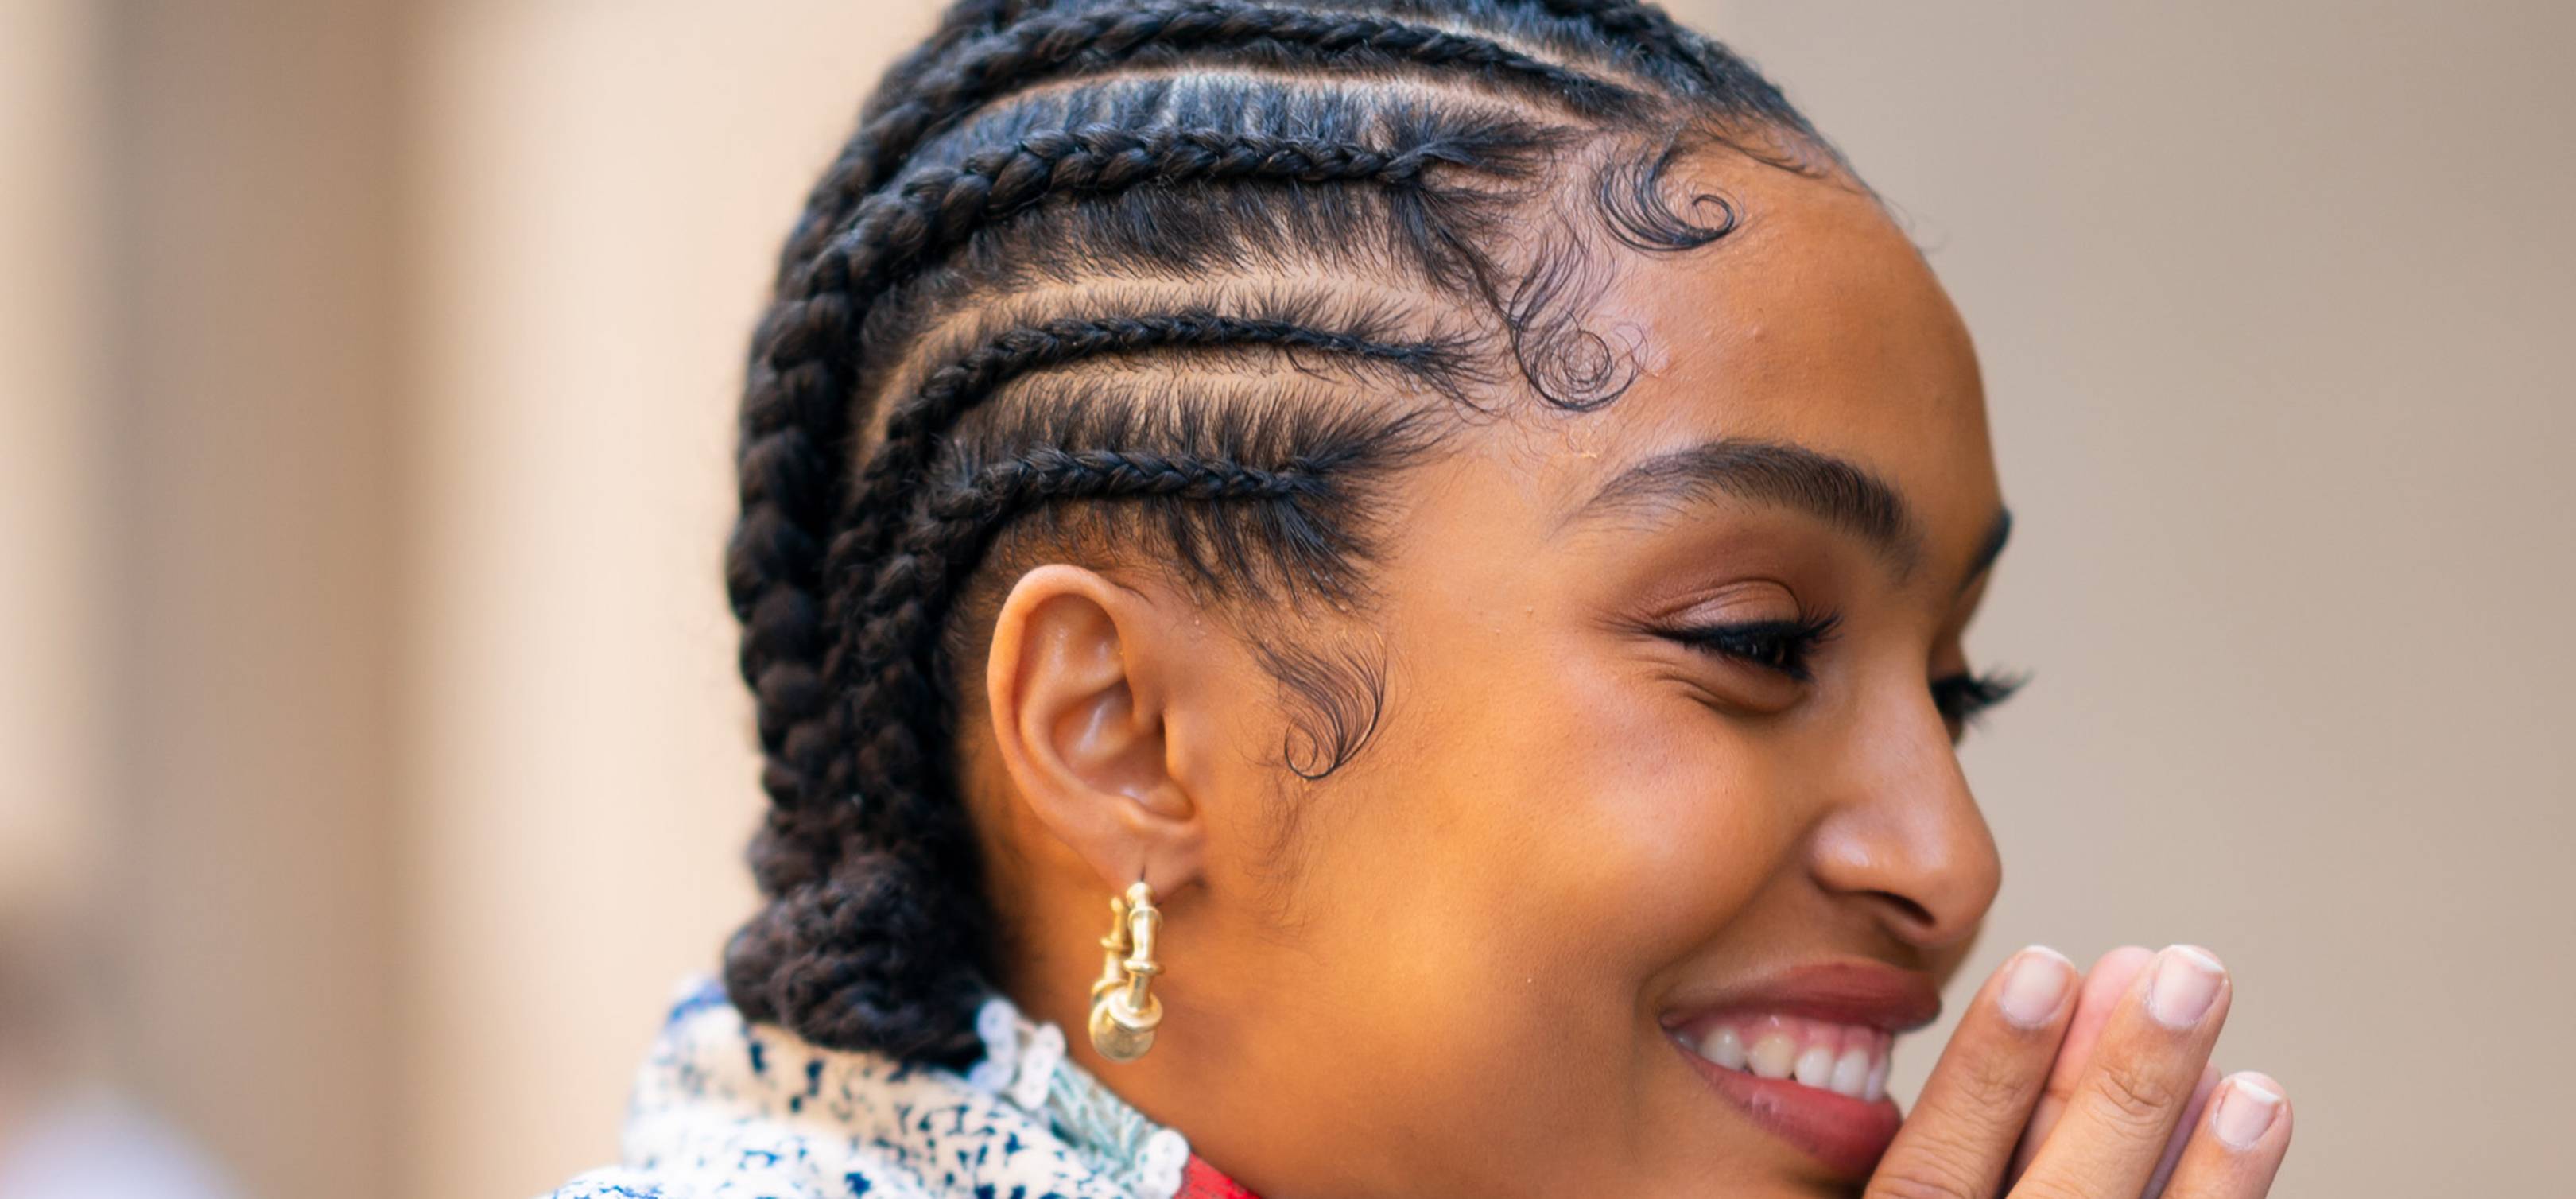 How To Tame Your Baby Hairs | Glamour UK